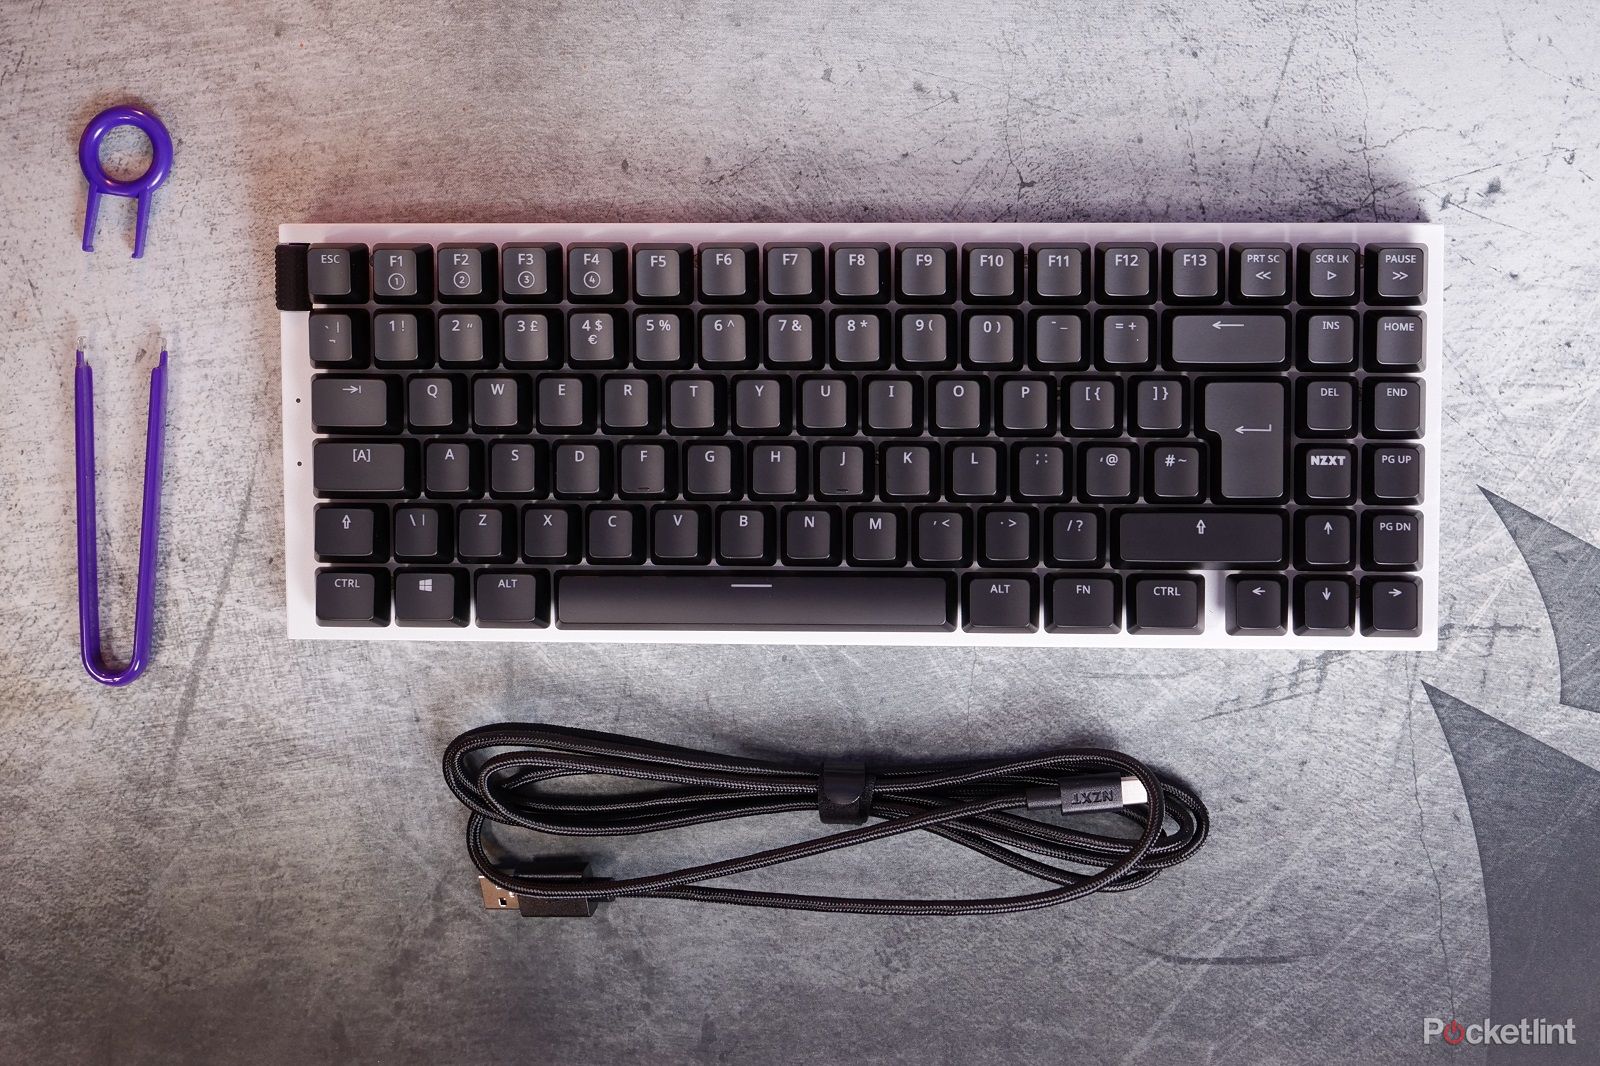 NZXT Function MINITKL keyboard review photo 19